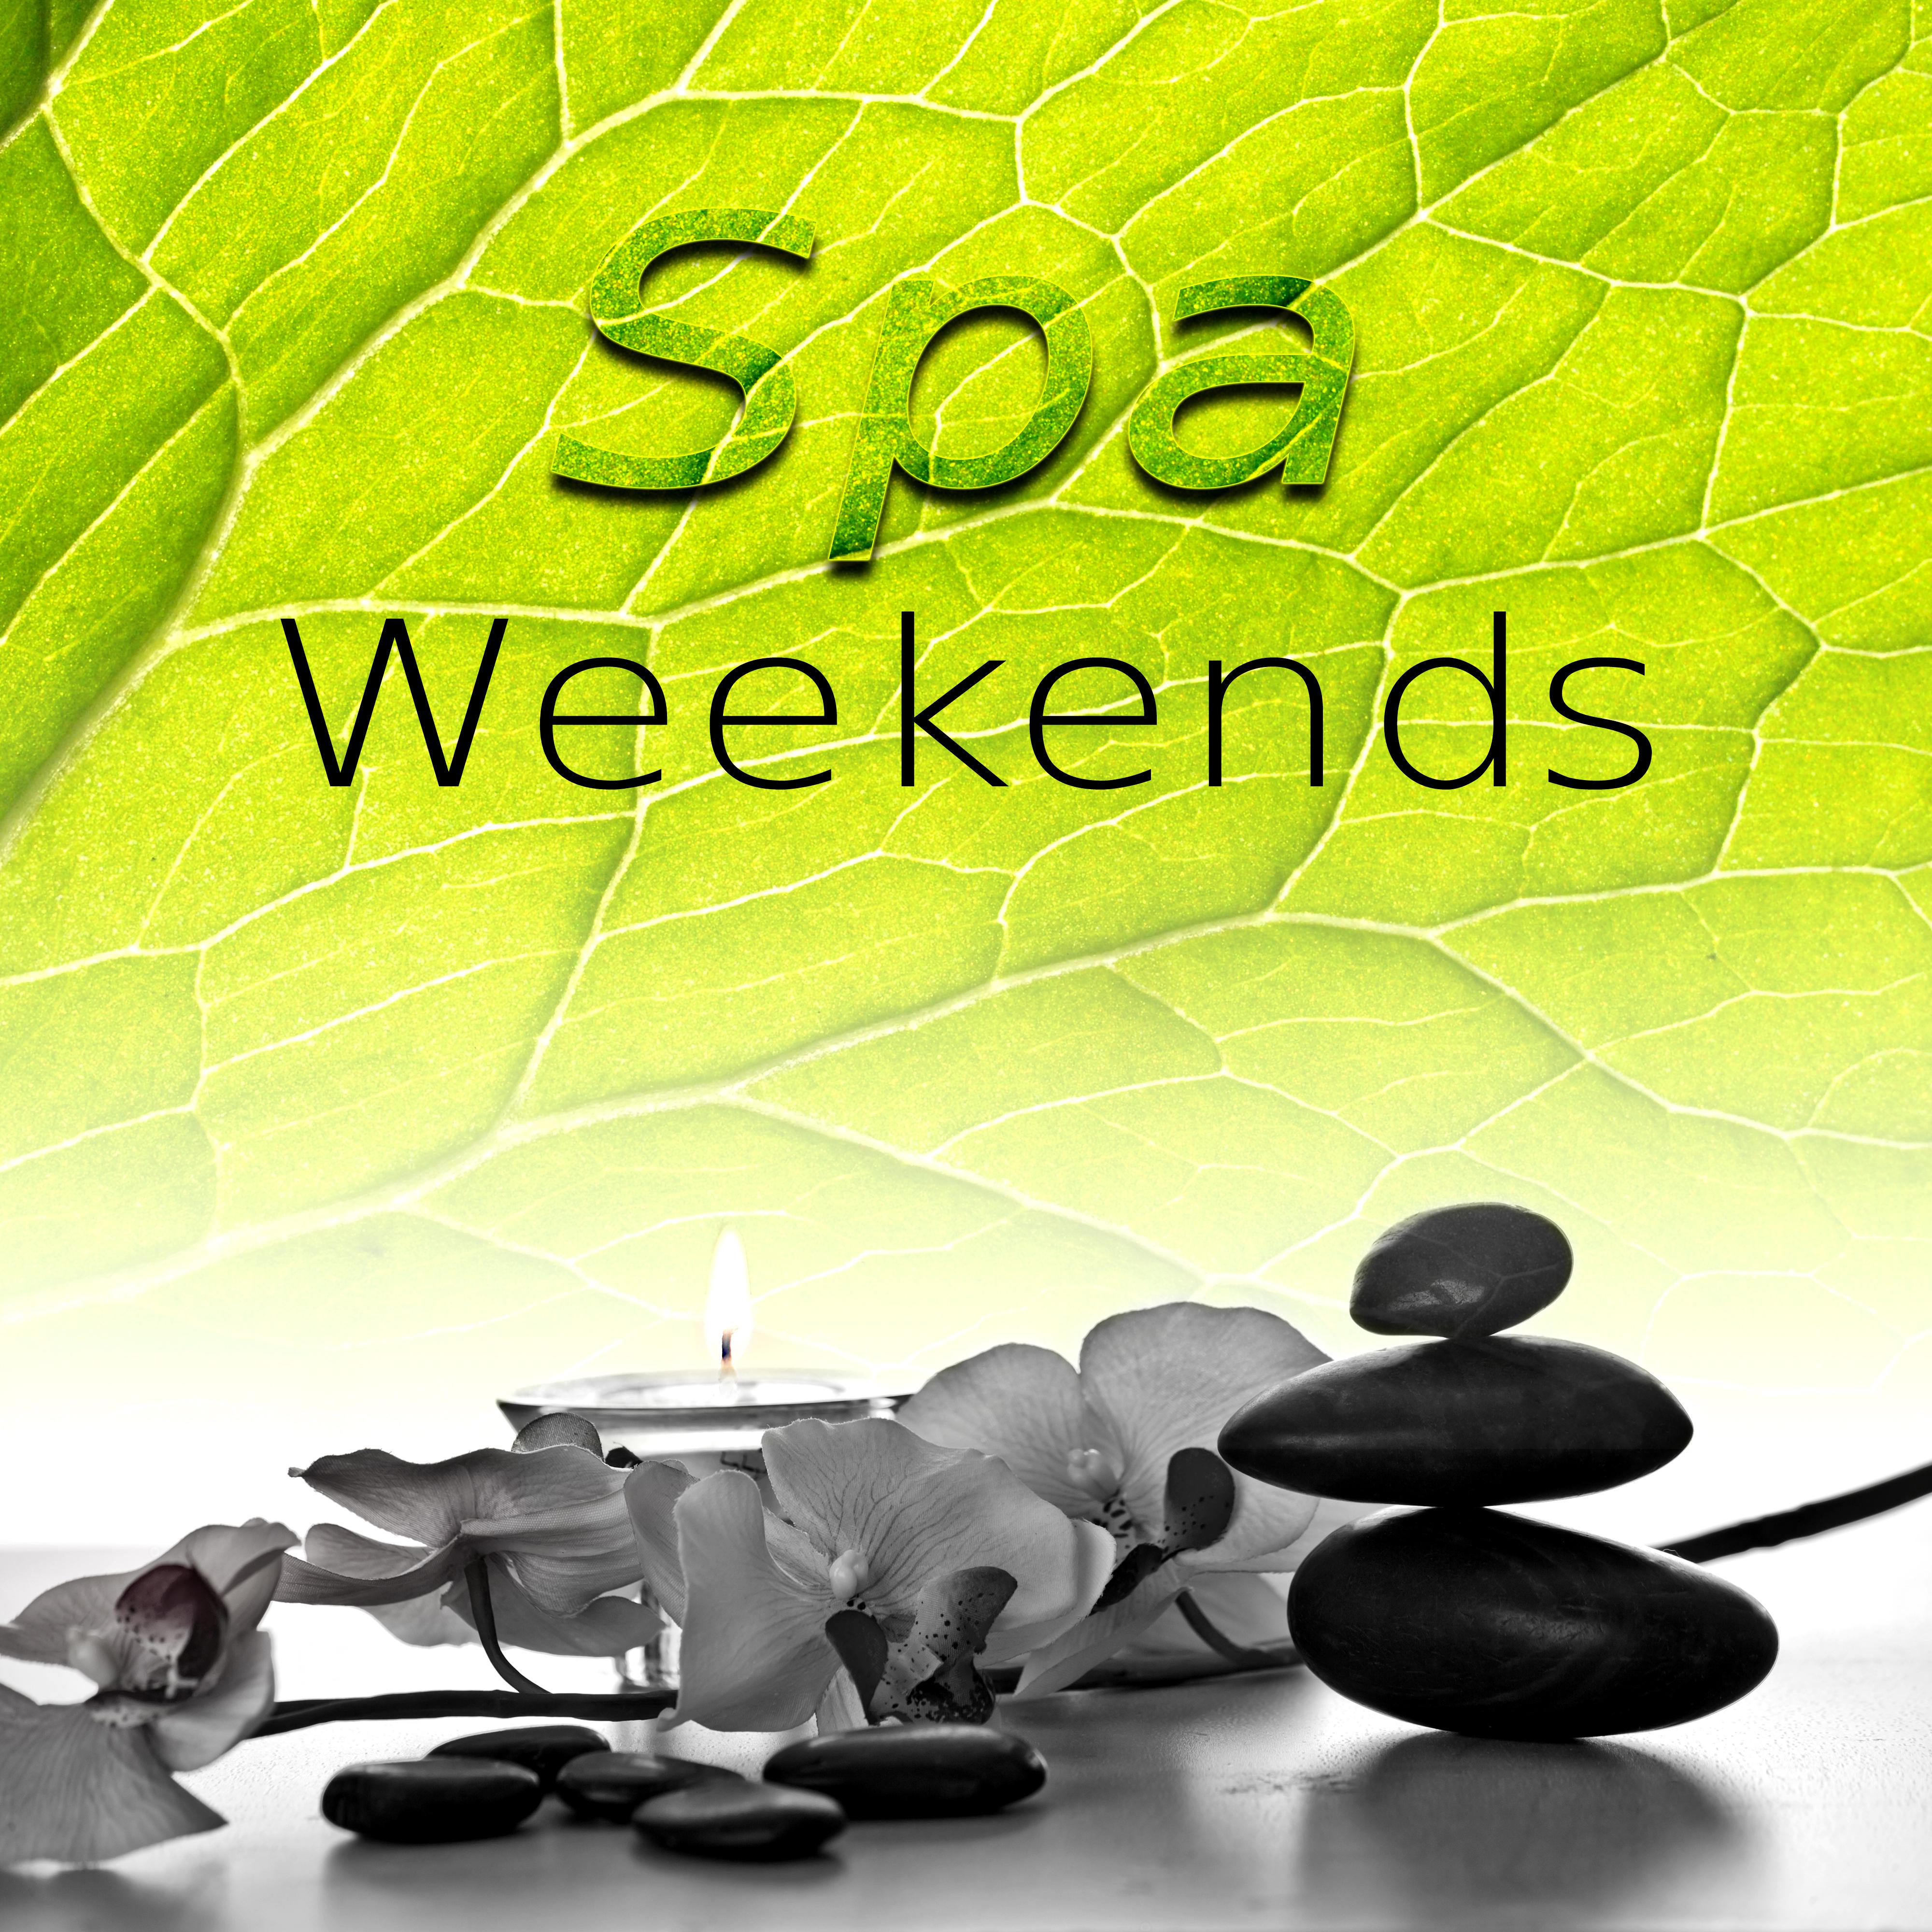 Spa Weekends - Spa Music and Relaxing Sounds for Wellness, Massage, Tai Chi and Total Relax, Oriental Music